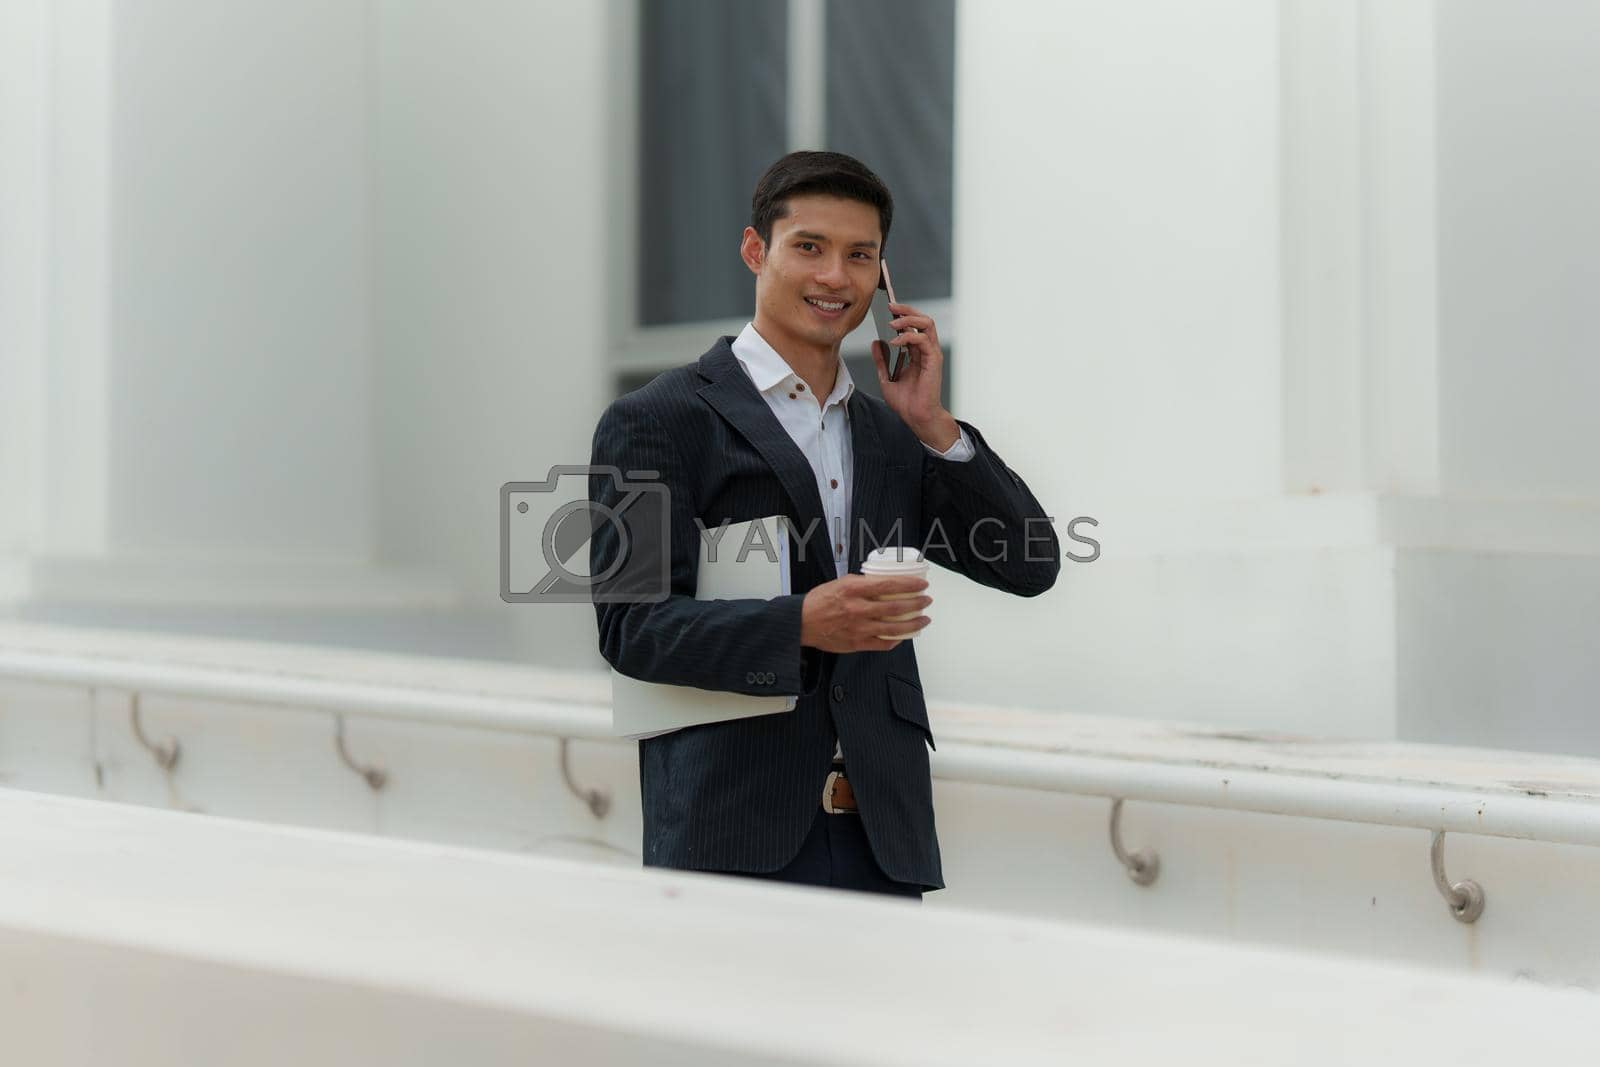 Royalty free image of Portrait of Asian Business man talking and dealing with customer by cell phone. Account and Finance concept. by itchaznong